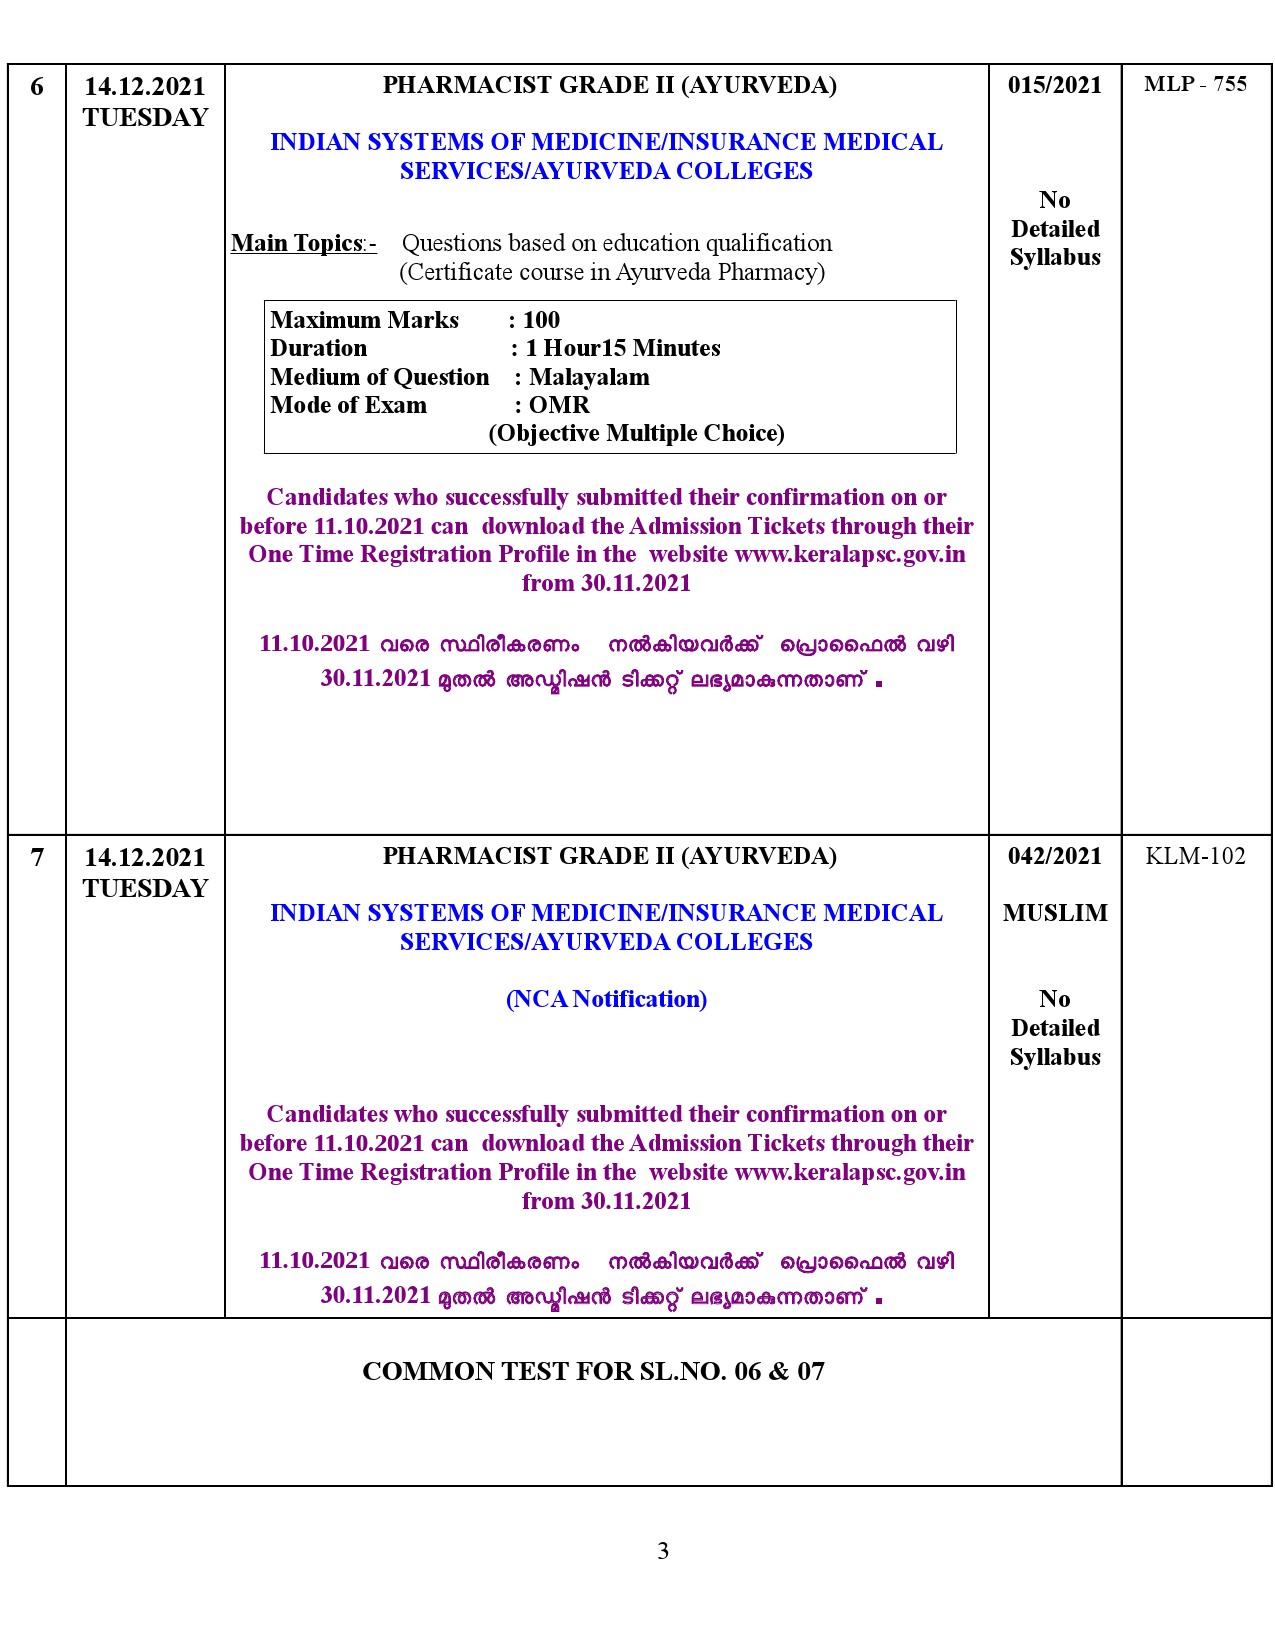 KPSC Examination Programme For The Month Of December 2021 - Notification Image 3